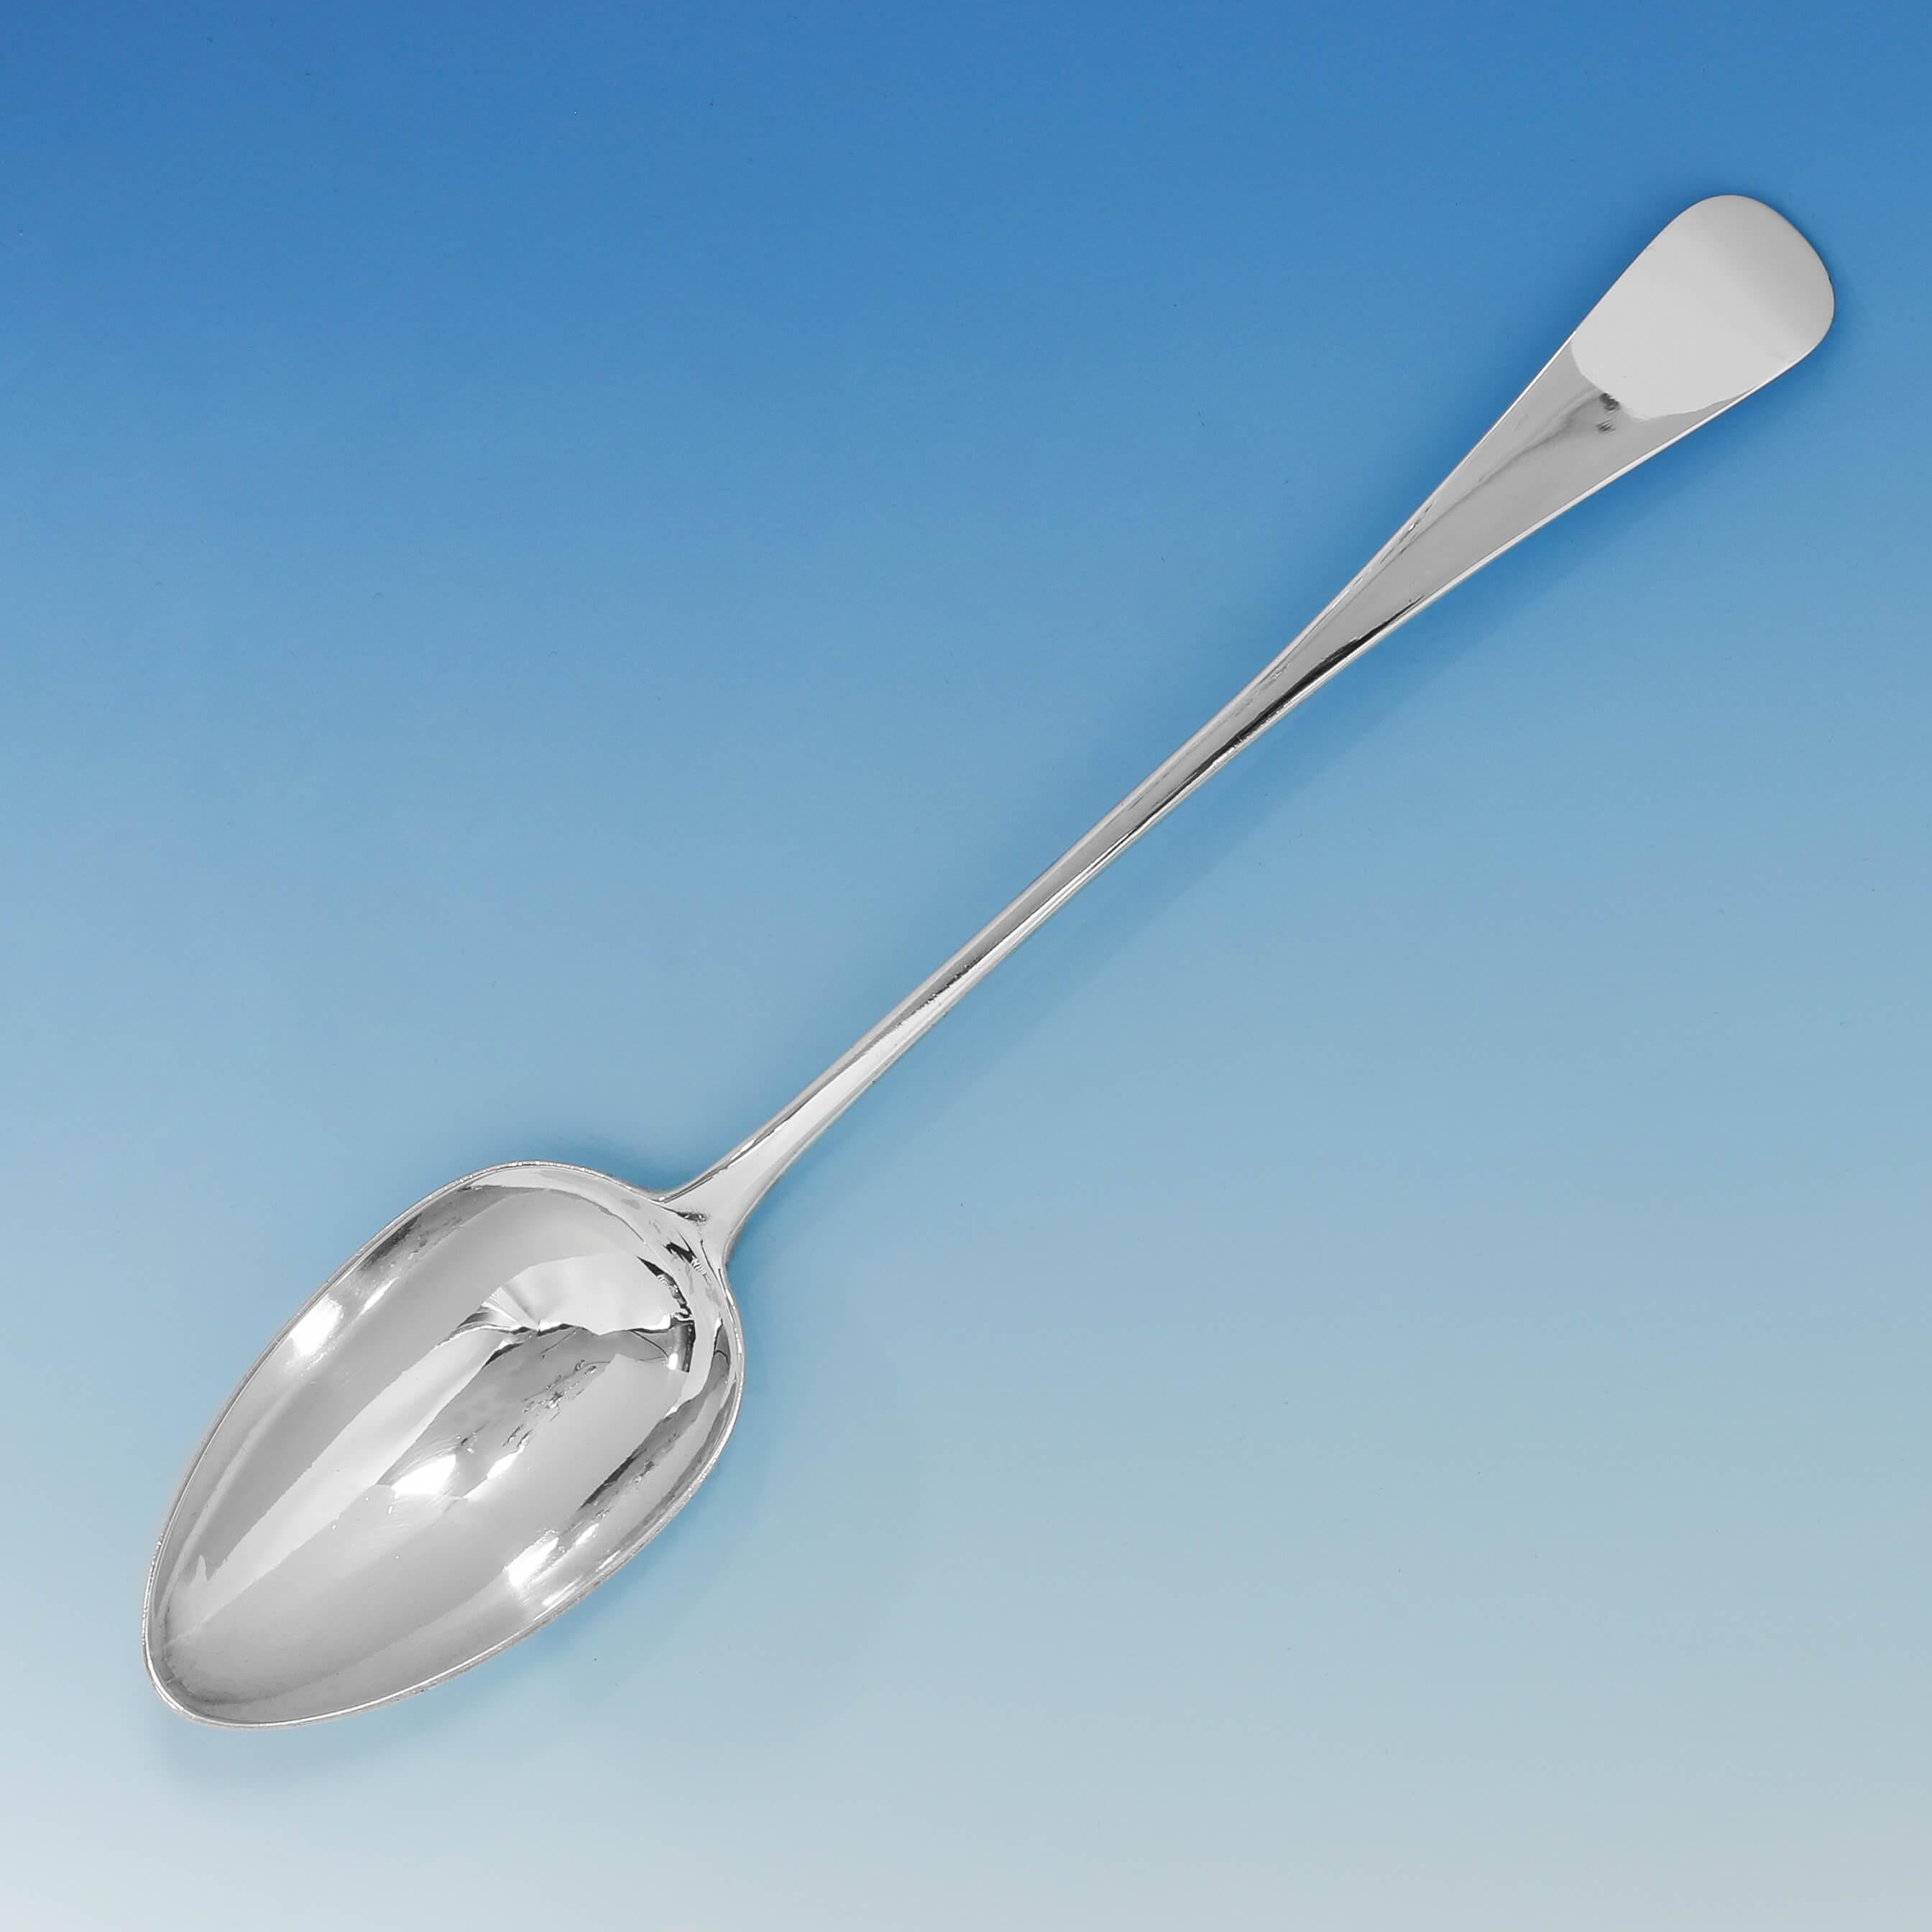 Hallmarked in London in 1815 by Solomon Hougham, this handsome, Regency Period, antique sterling silver basting spoon, is in 'Old English' pattern. The basting spoon measures 12